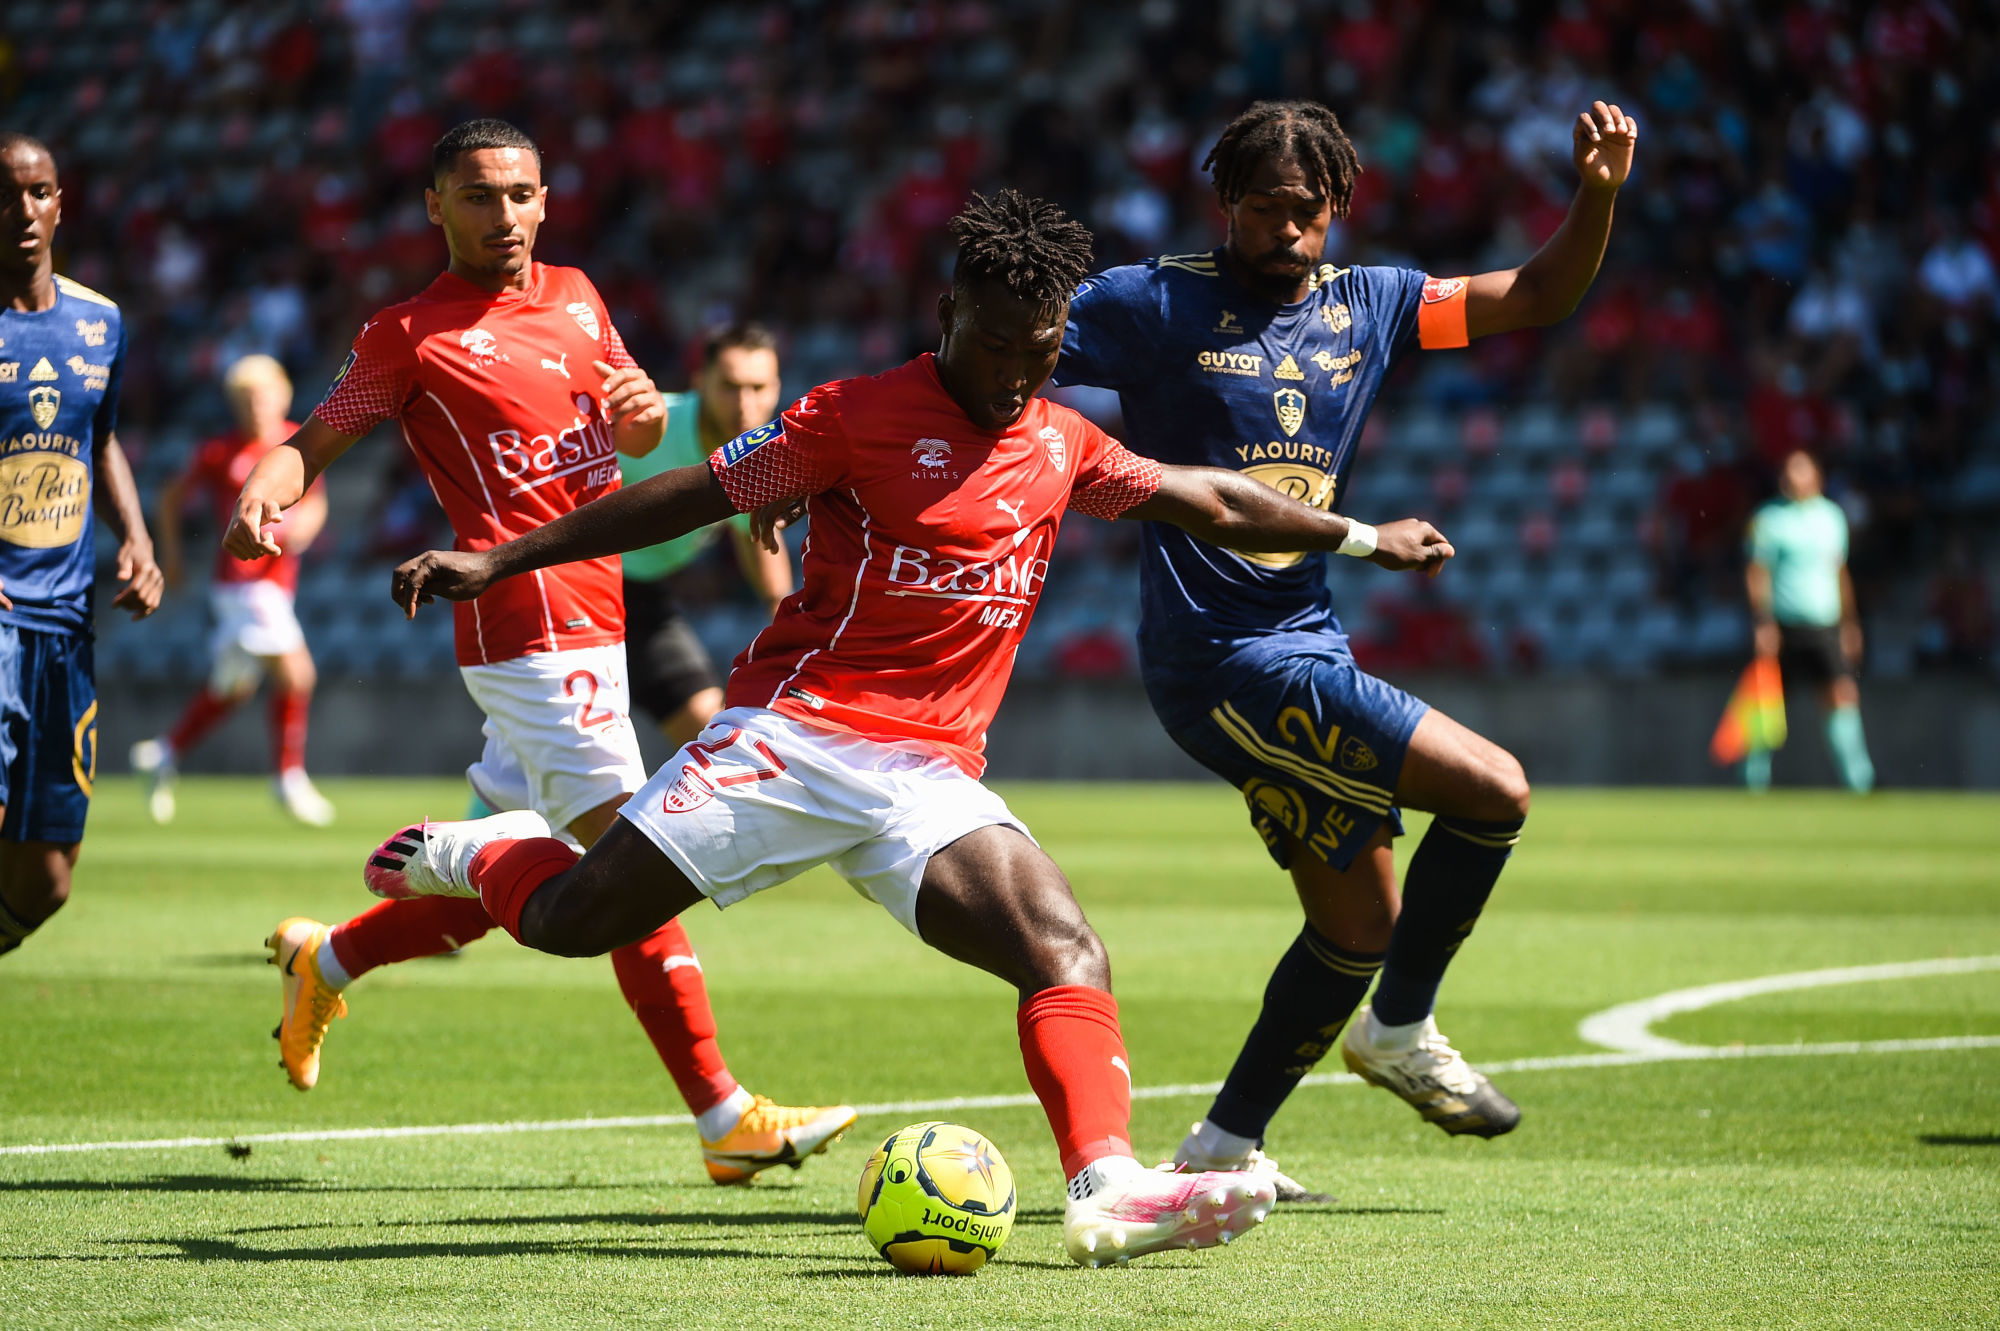 Kevin DENKEY of Nimes and Jean-Kevin DUVERNE of Brest  during the Ligue 1 match between Nimes and Brest on August 23, 2020 in Nimes, France. (Photo by Alexandre Dimou/Icon Sport) - Stade des Costières - Nimes (France)